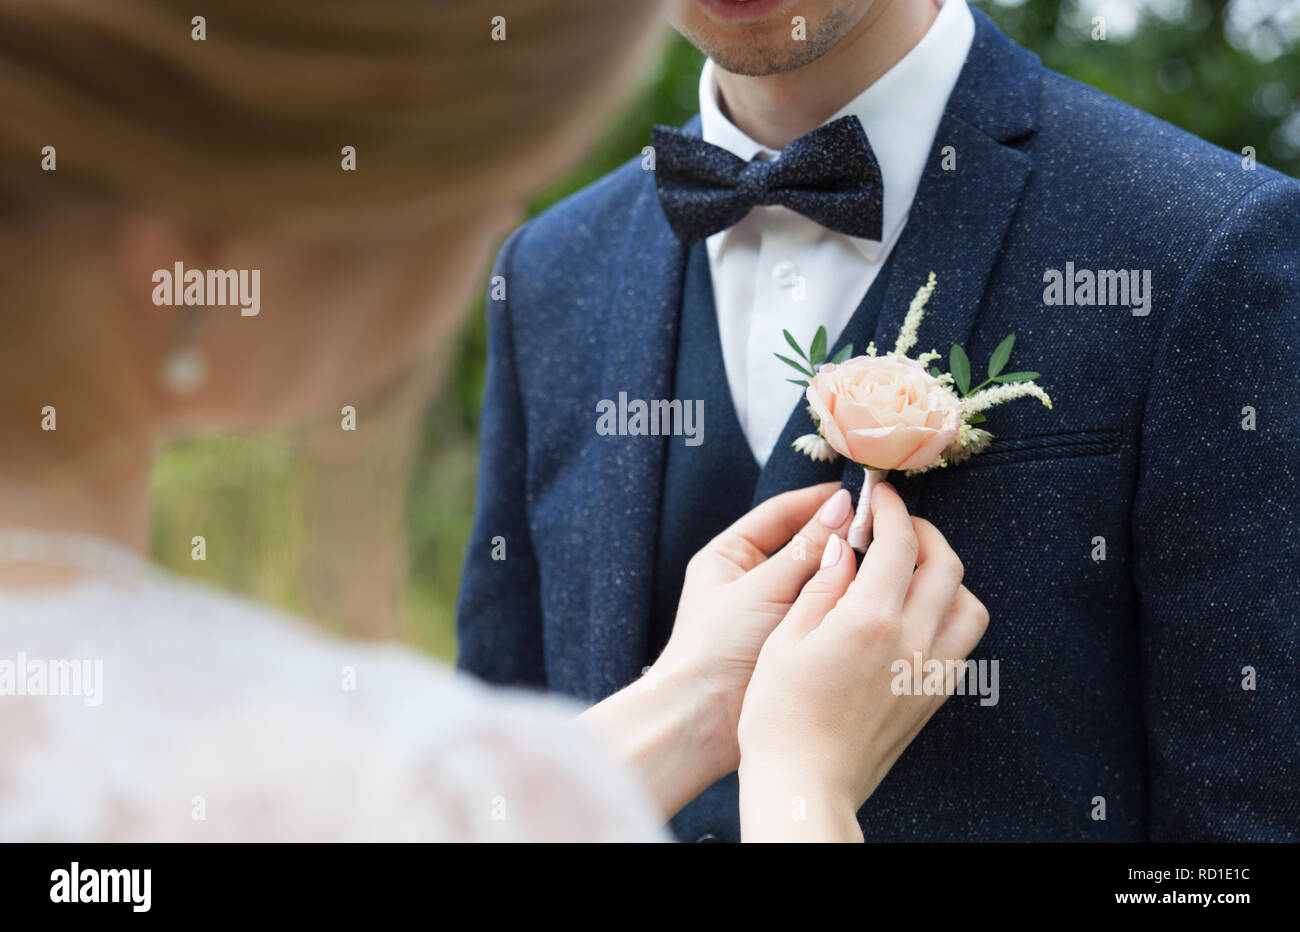 the bride attaches the groom a buttonhole on the lapel of his jacket Stock Photo